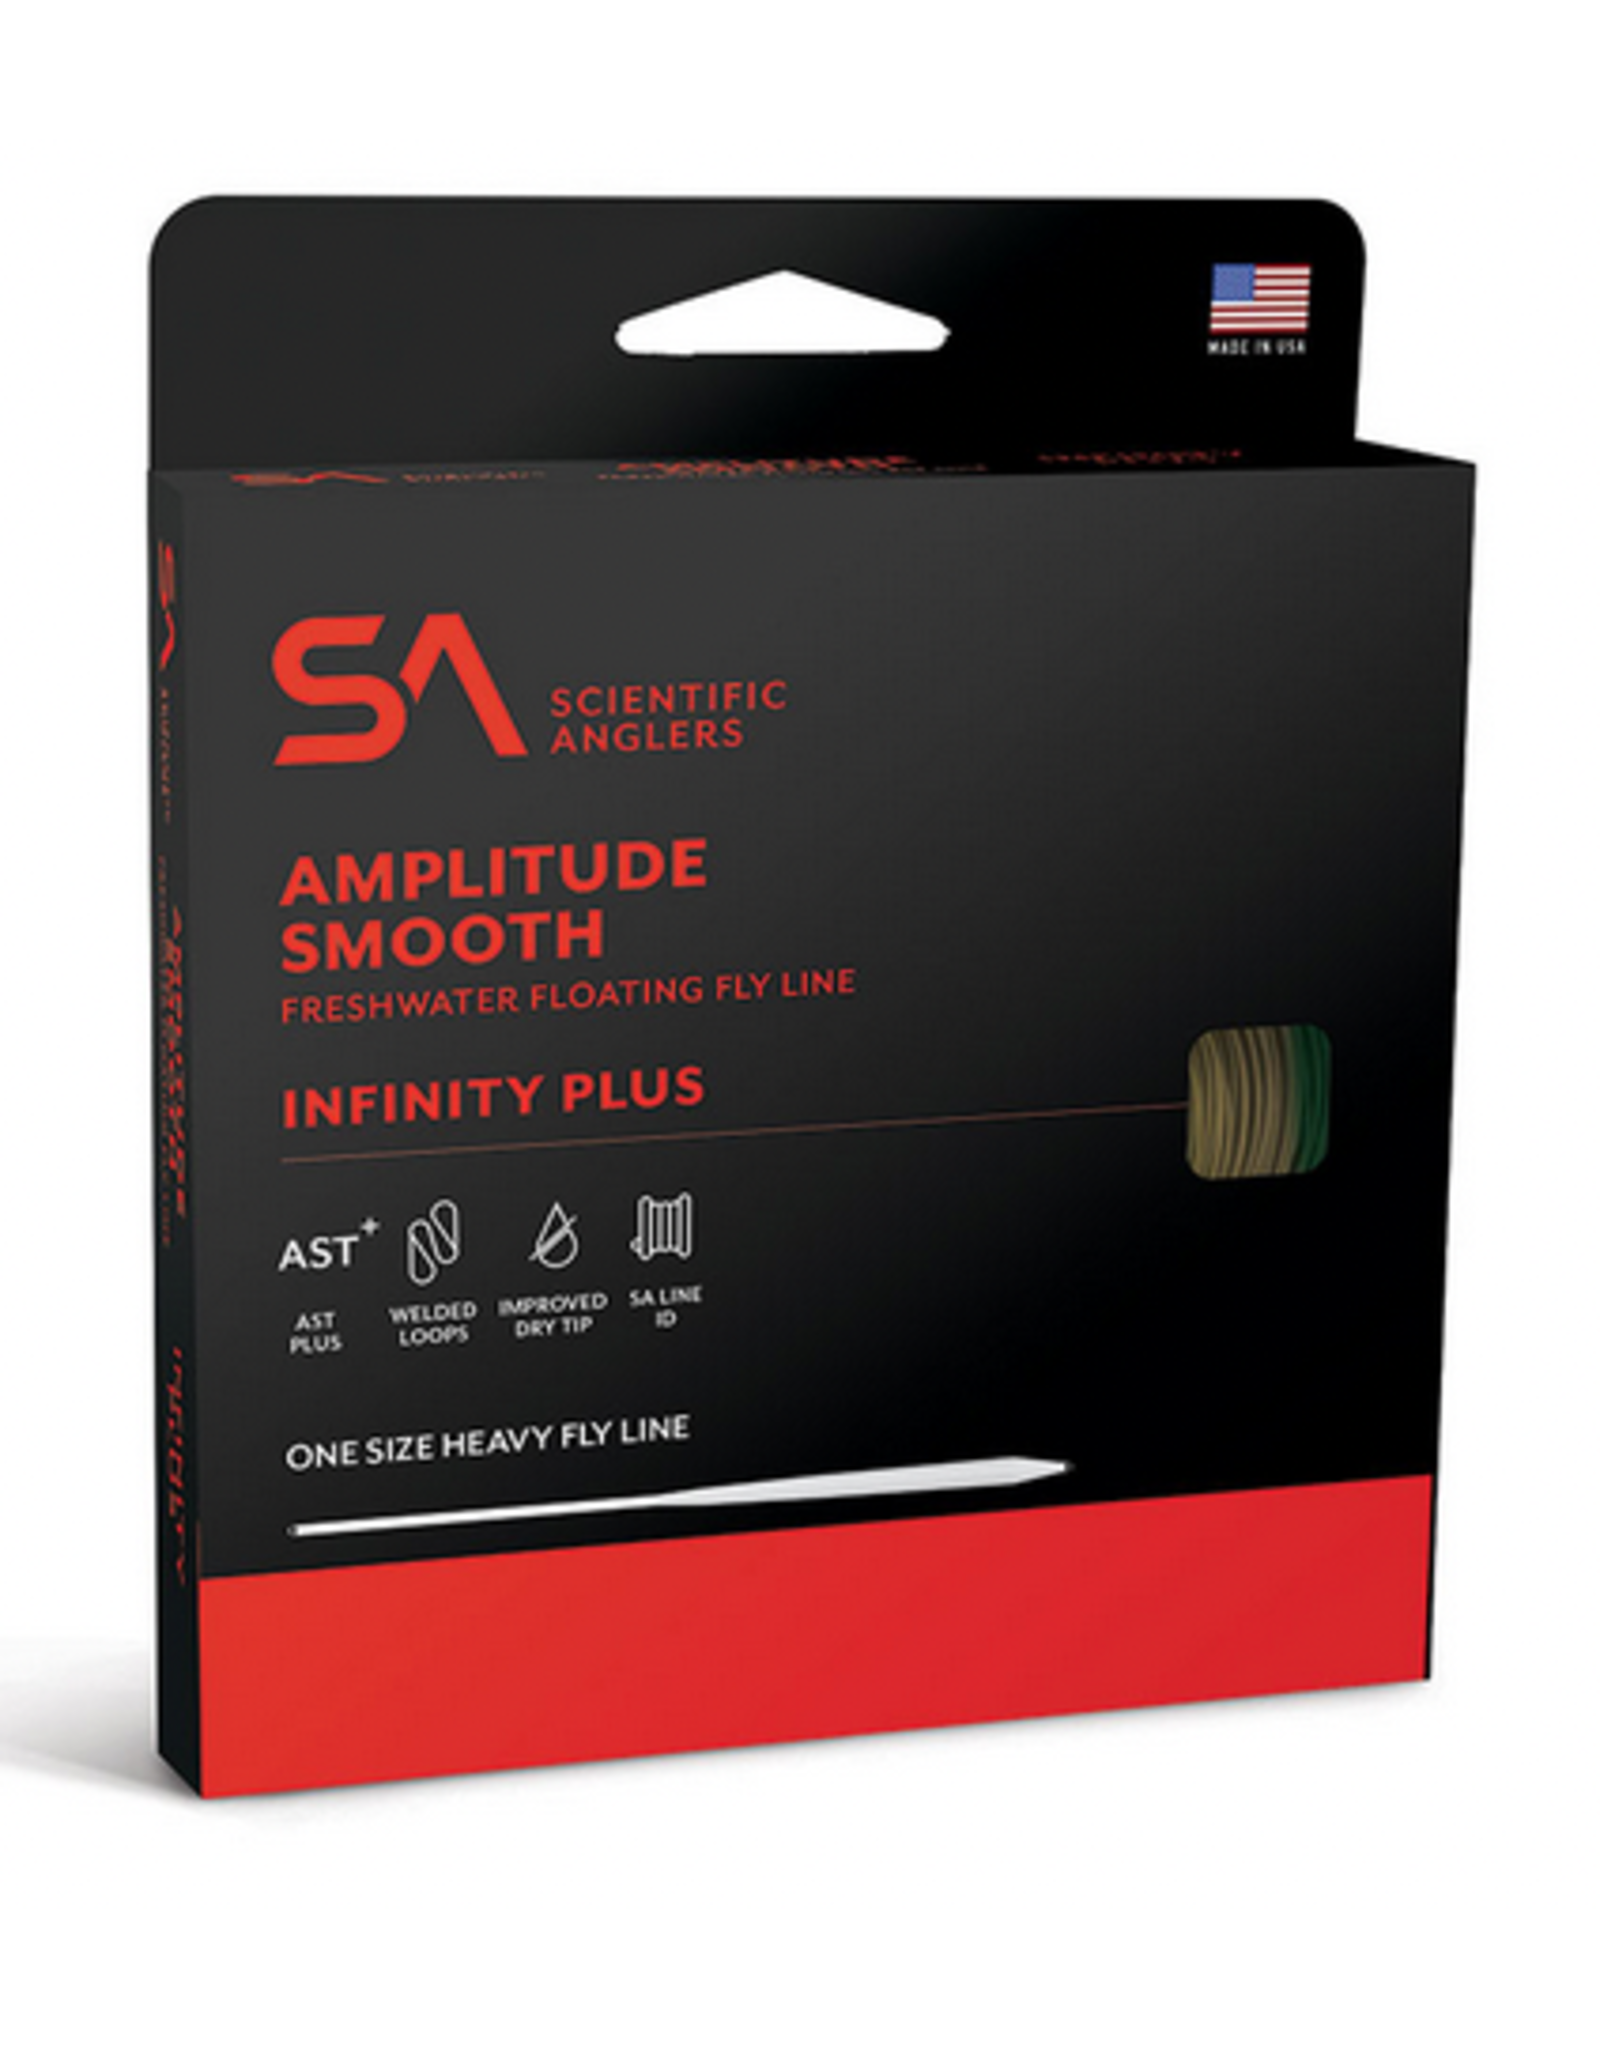 Scientific Anglers Scientific Anglers Amplitude Smooth Infinity Plus